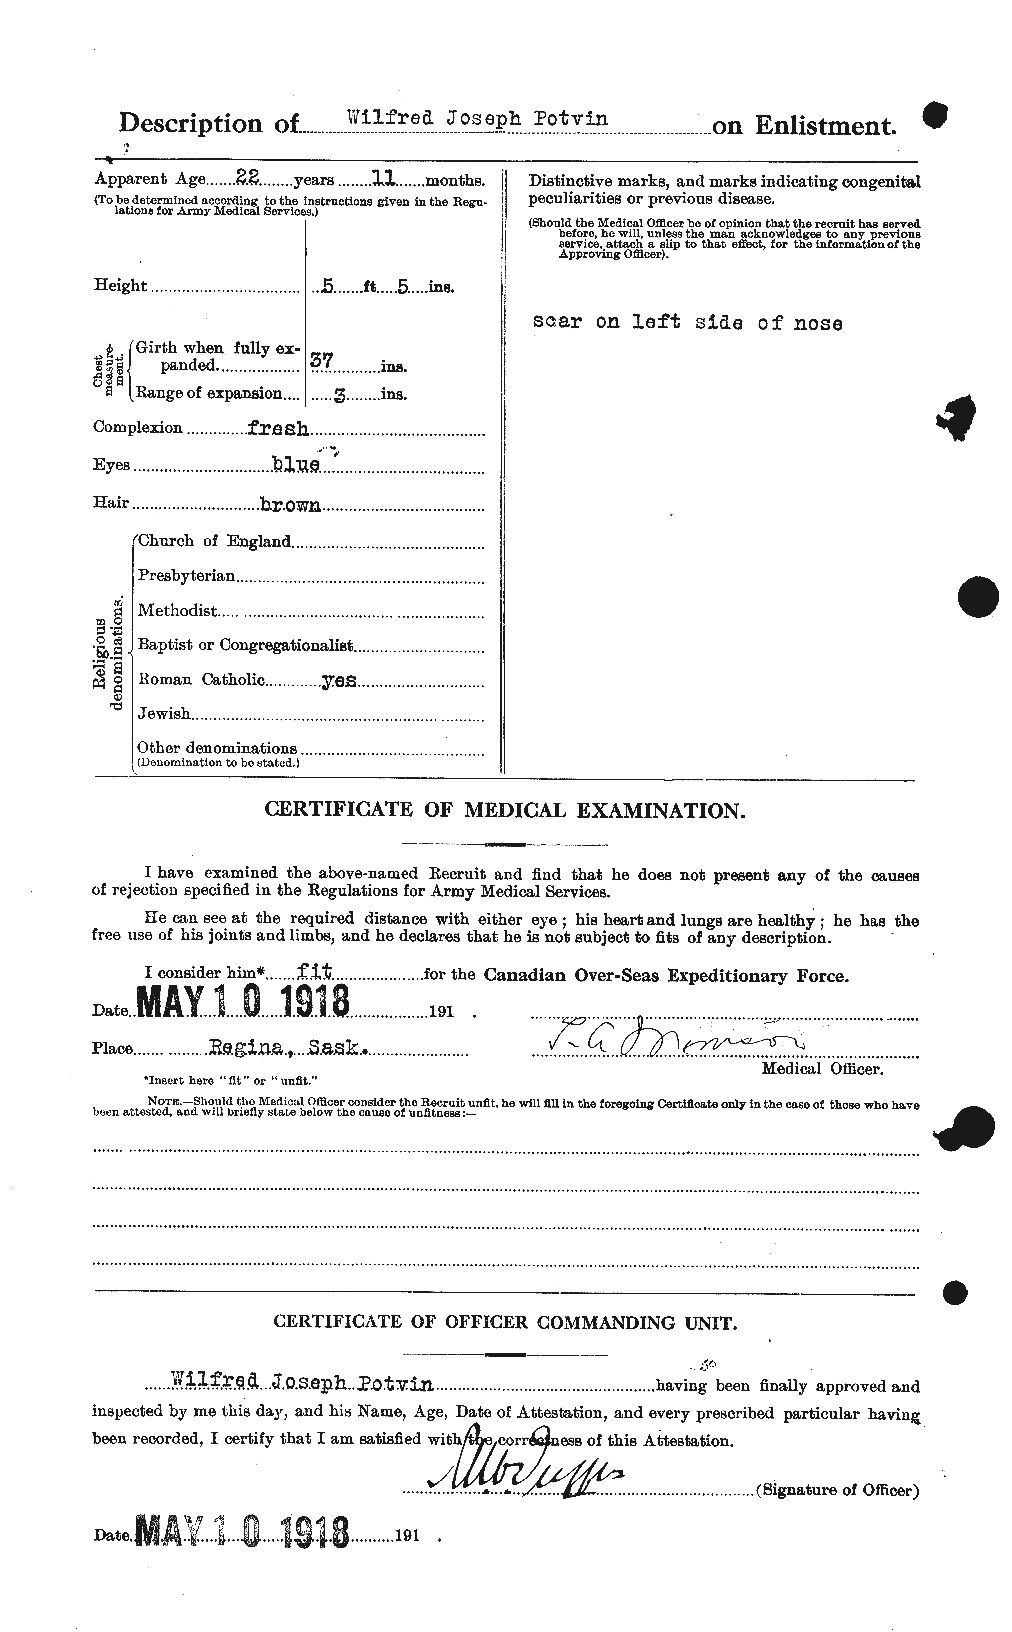 Personnel Records of the First World War - CEF 584675b